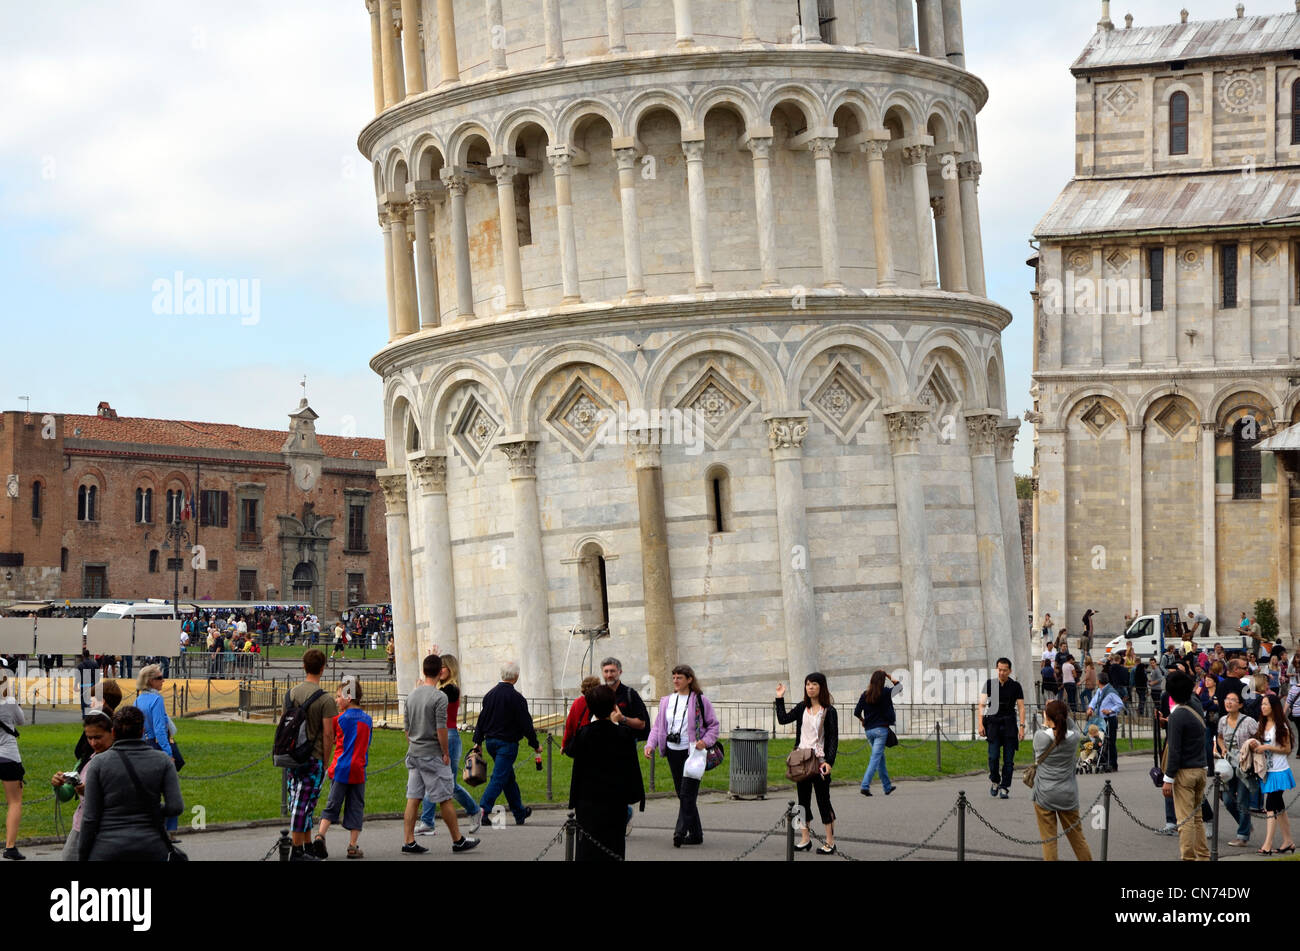 The lower storeys of the Leaning Tower of Pisa, Tuscany, Italy, Europe. Stock Photo